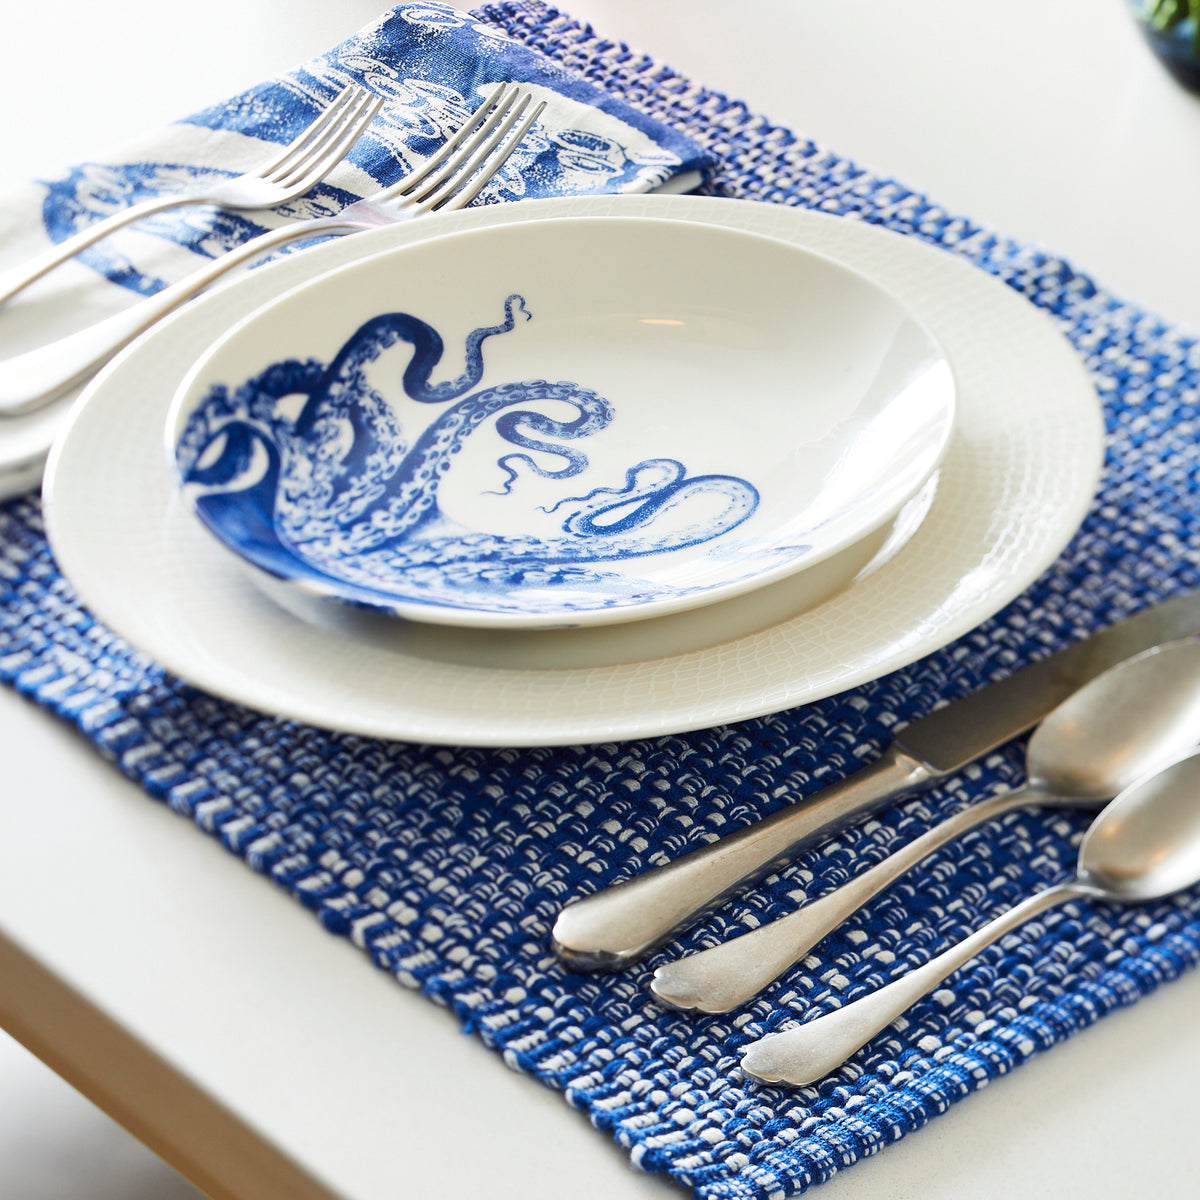 Dining table setting with a blue and white octopus-themed bowl in a contemporary shape, a Lucy Coupe Salad Plate from Caskata Artisanal Home, silverware, and a folded blue patterned napkin, all placed on a blue woven placemat. All items are both dishwasher and microwave safe.